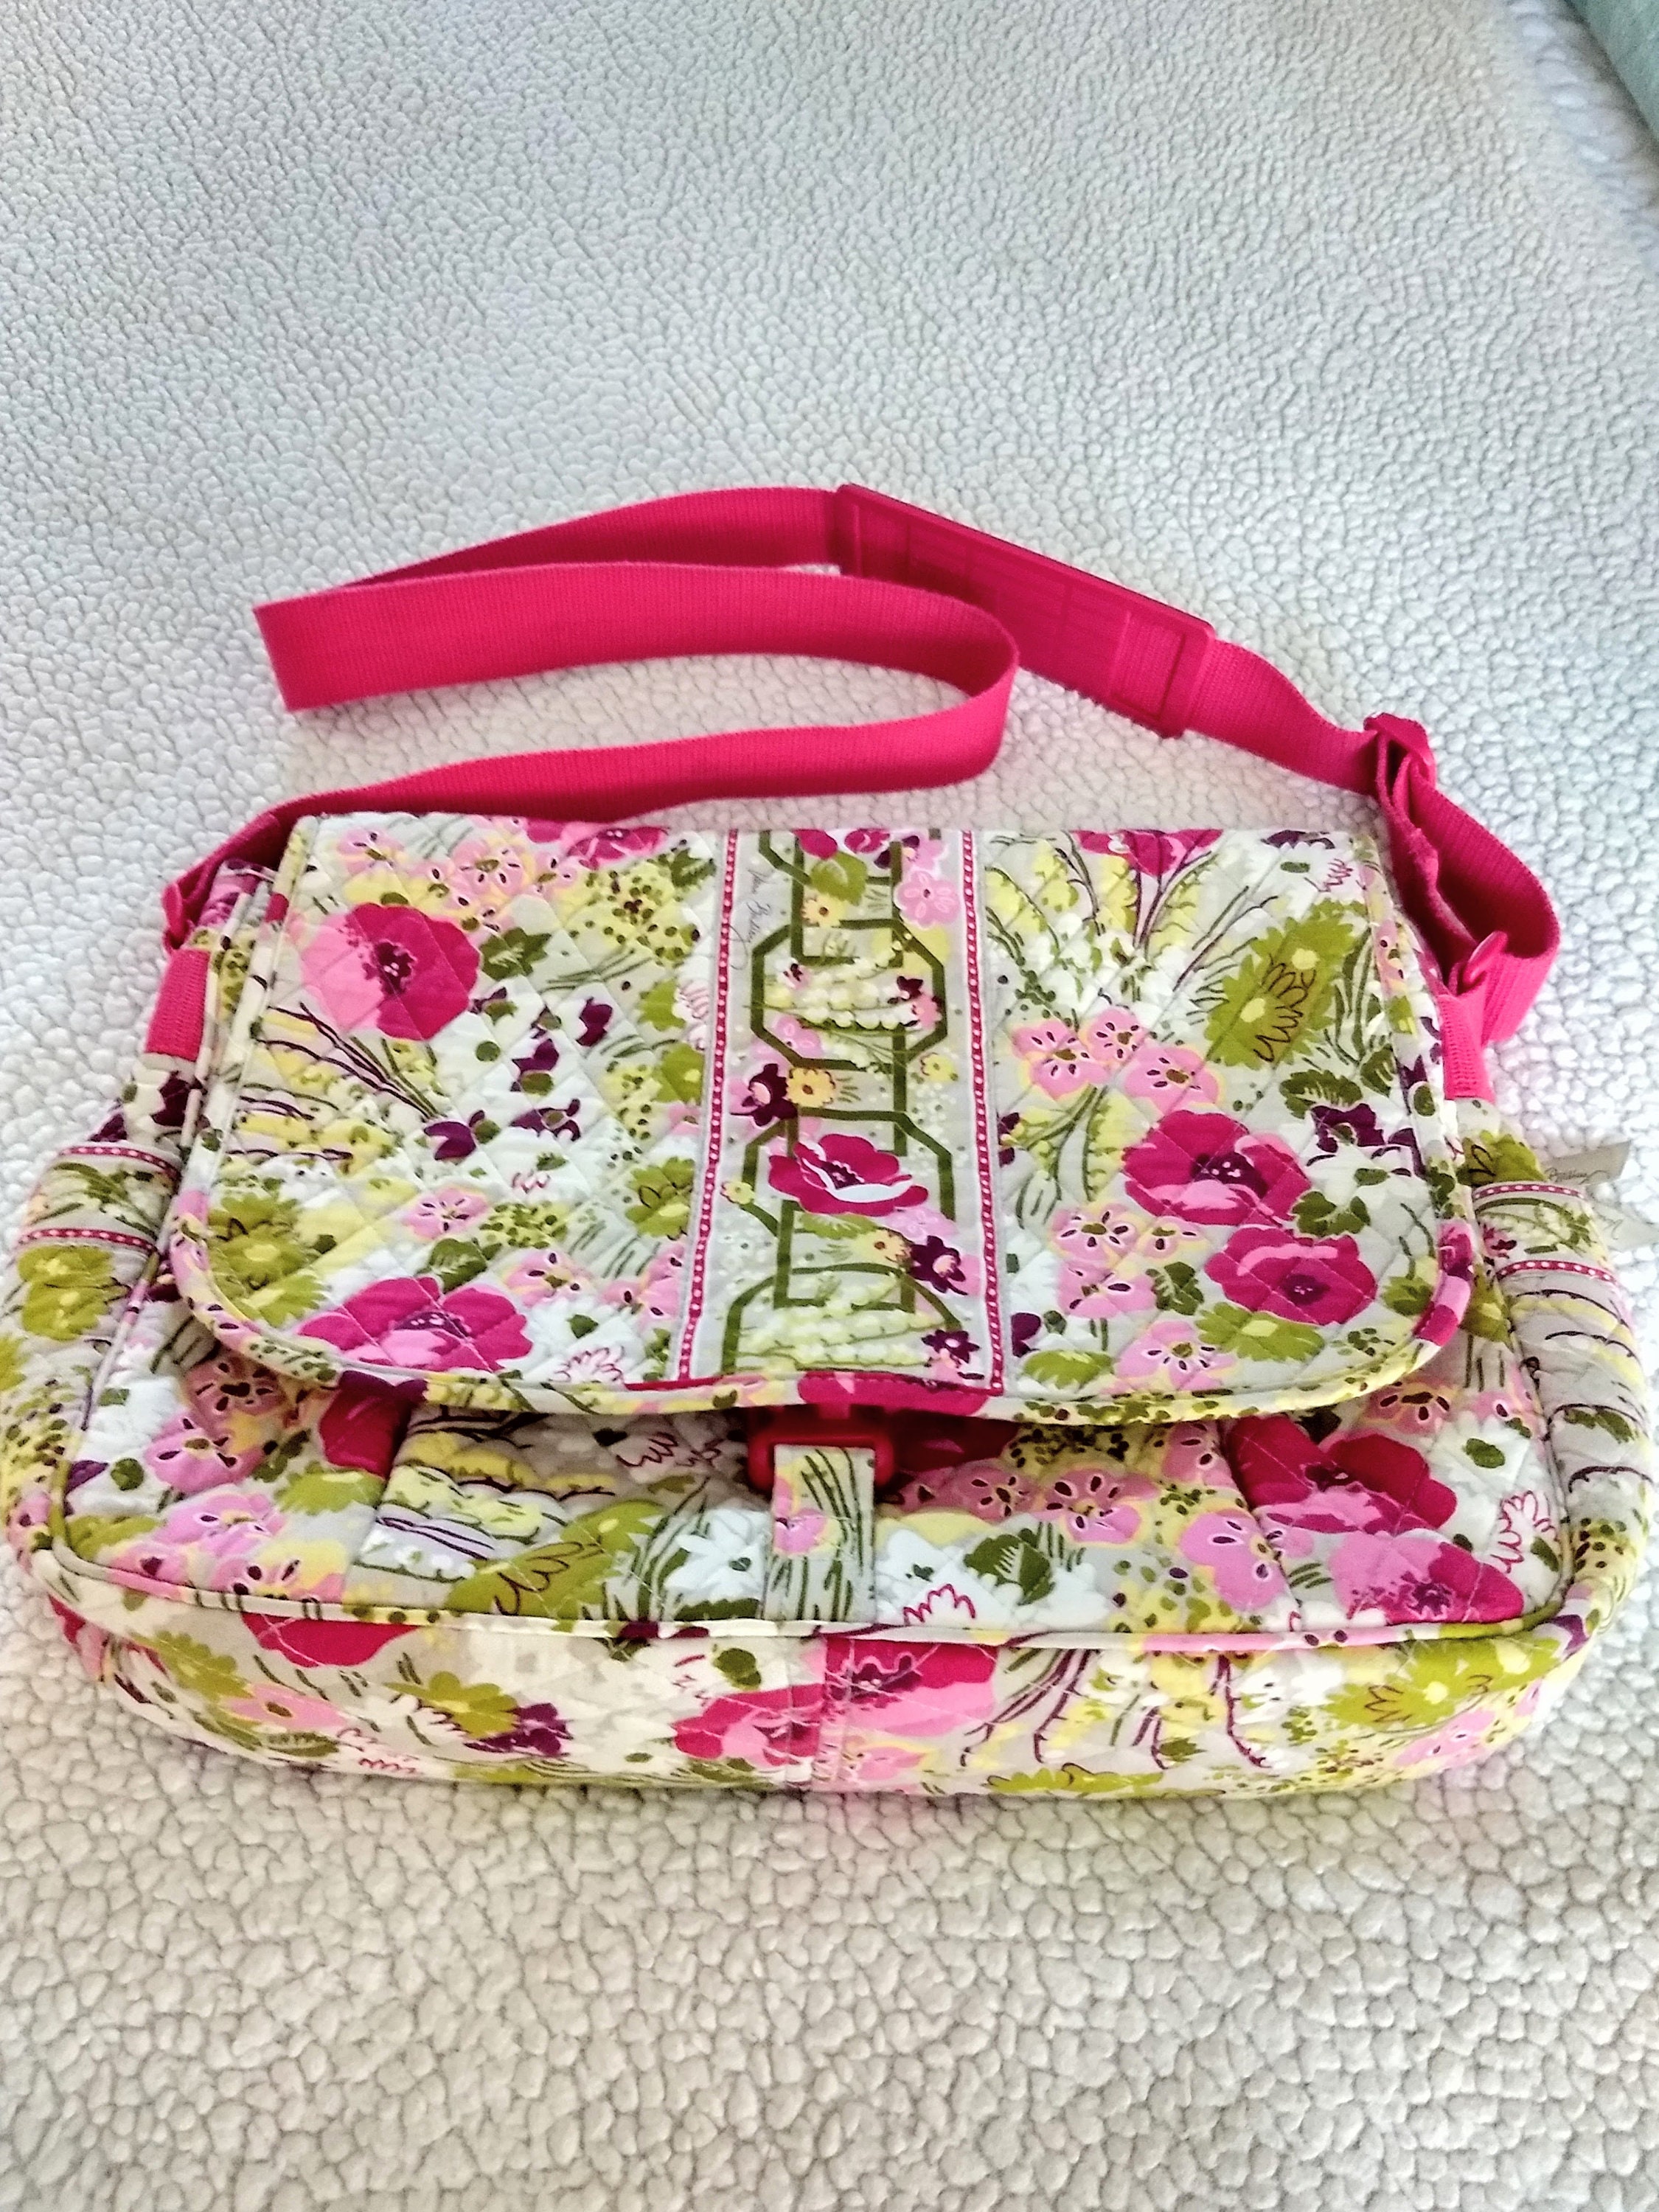 VERA BRADLEY Diaper Bag/quilted Cotton Retired Pink Flowers Print Shoulder Tote  Bag/comfy Soft Maternity Overnight Bag/gift for Her/no.489 -  Canada